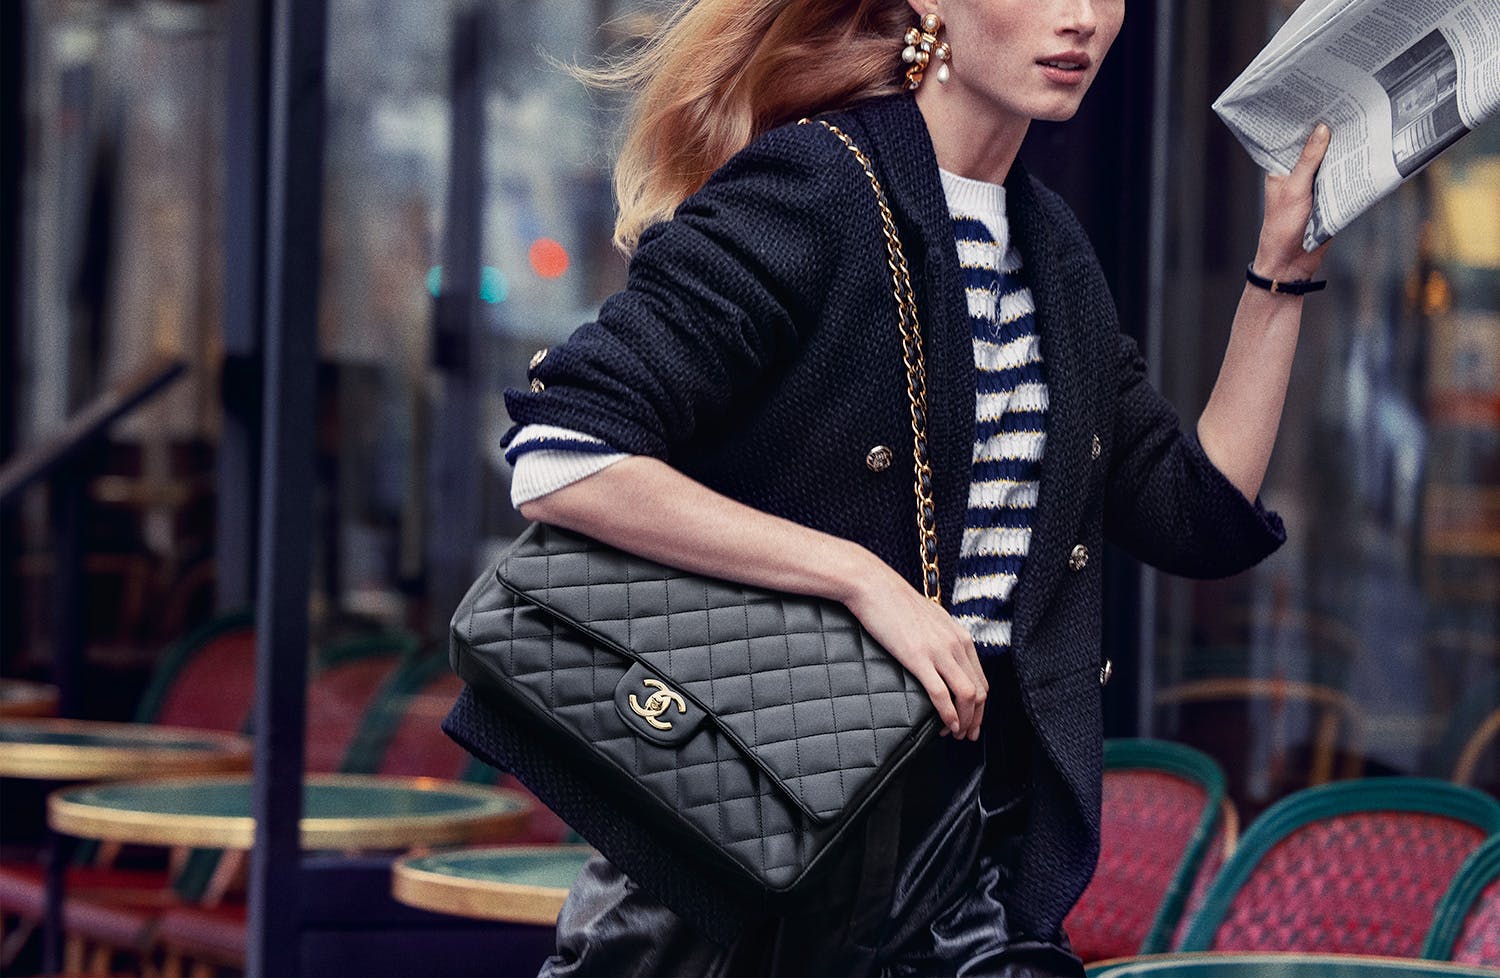 Sofia Coppola Brings an Icon to the Streets in Chanel's Latest Bag